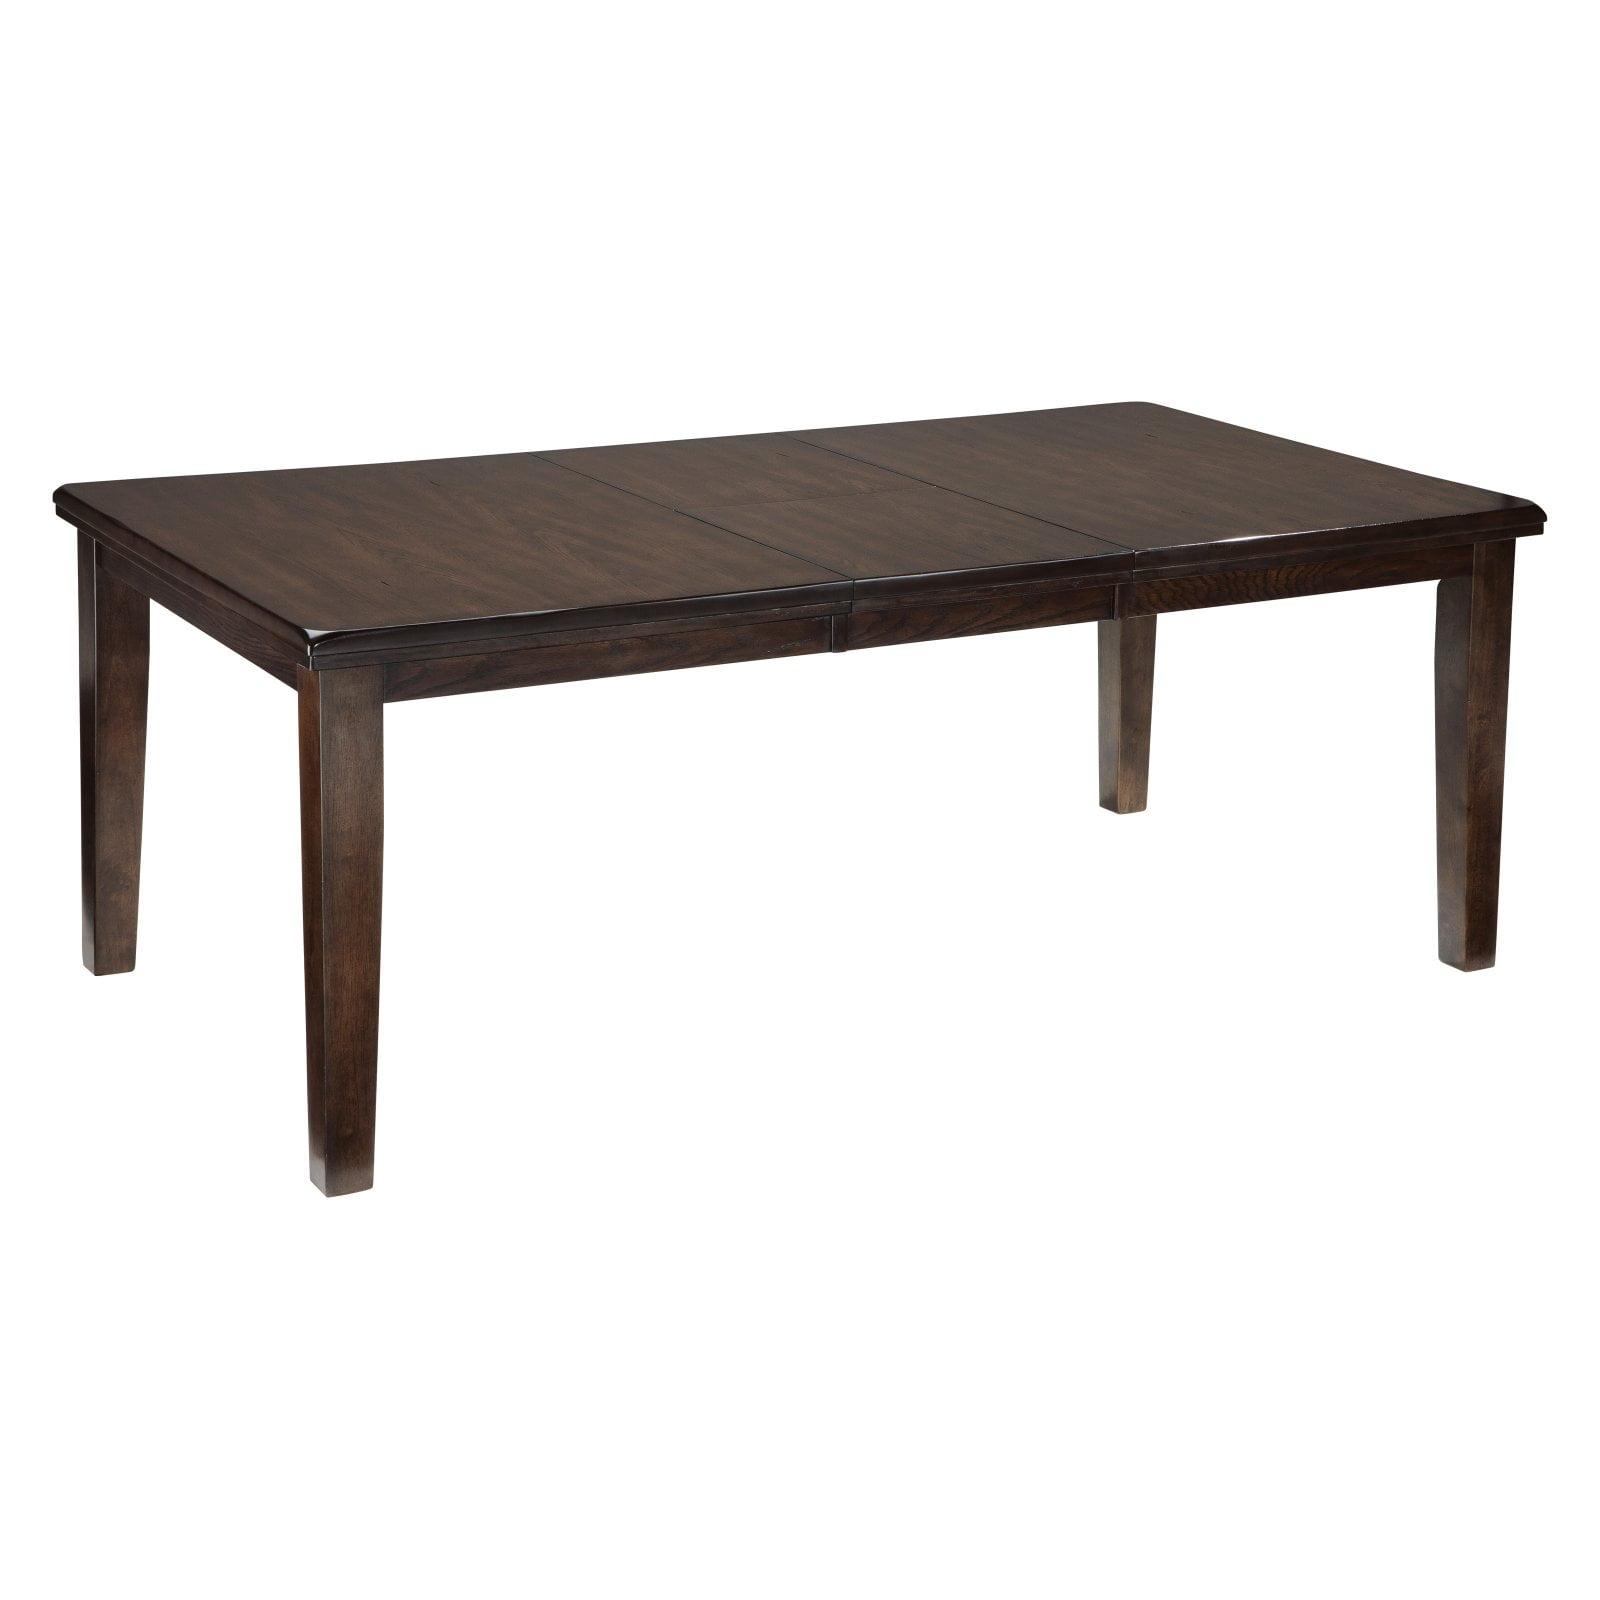 Transitional Smoky Dark Brown Oak Extendable Dining Table